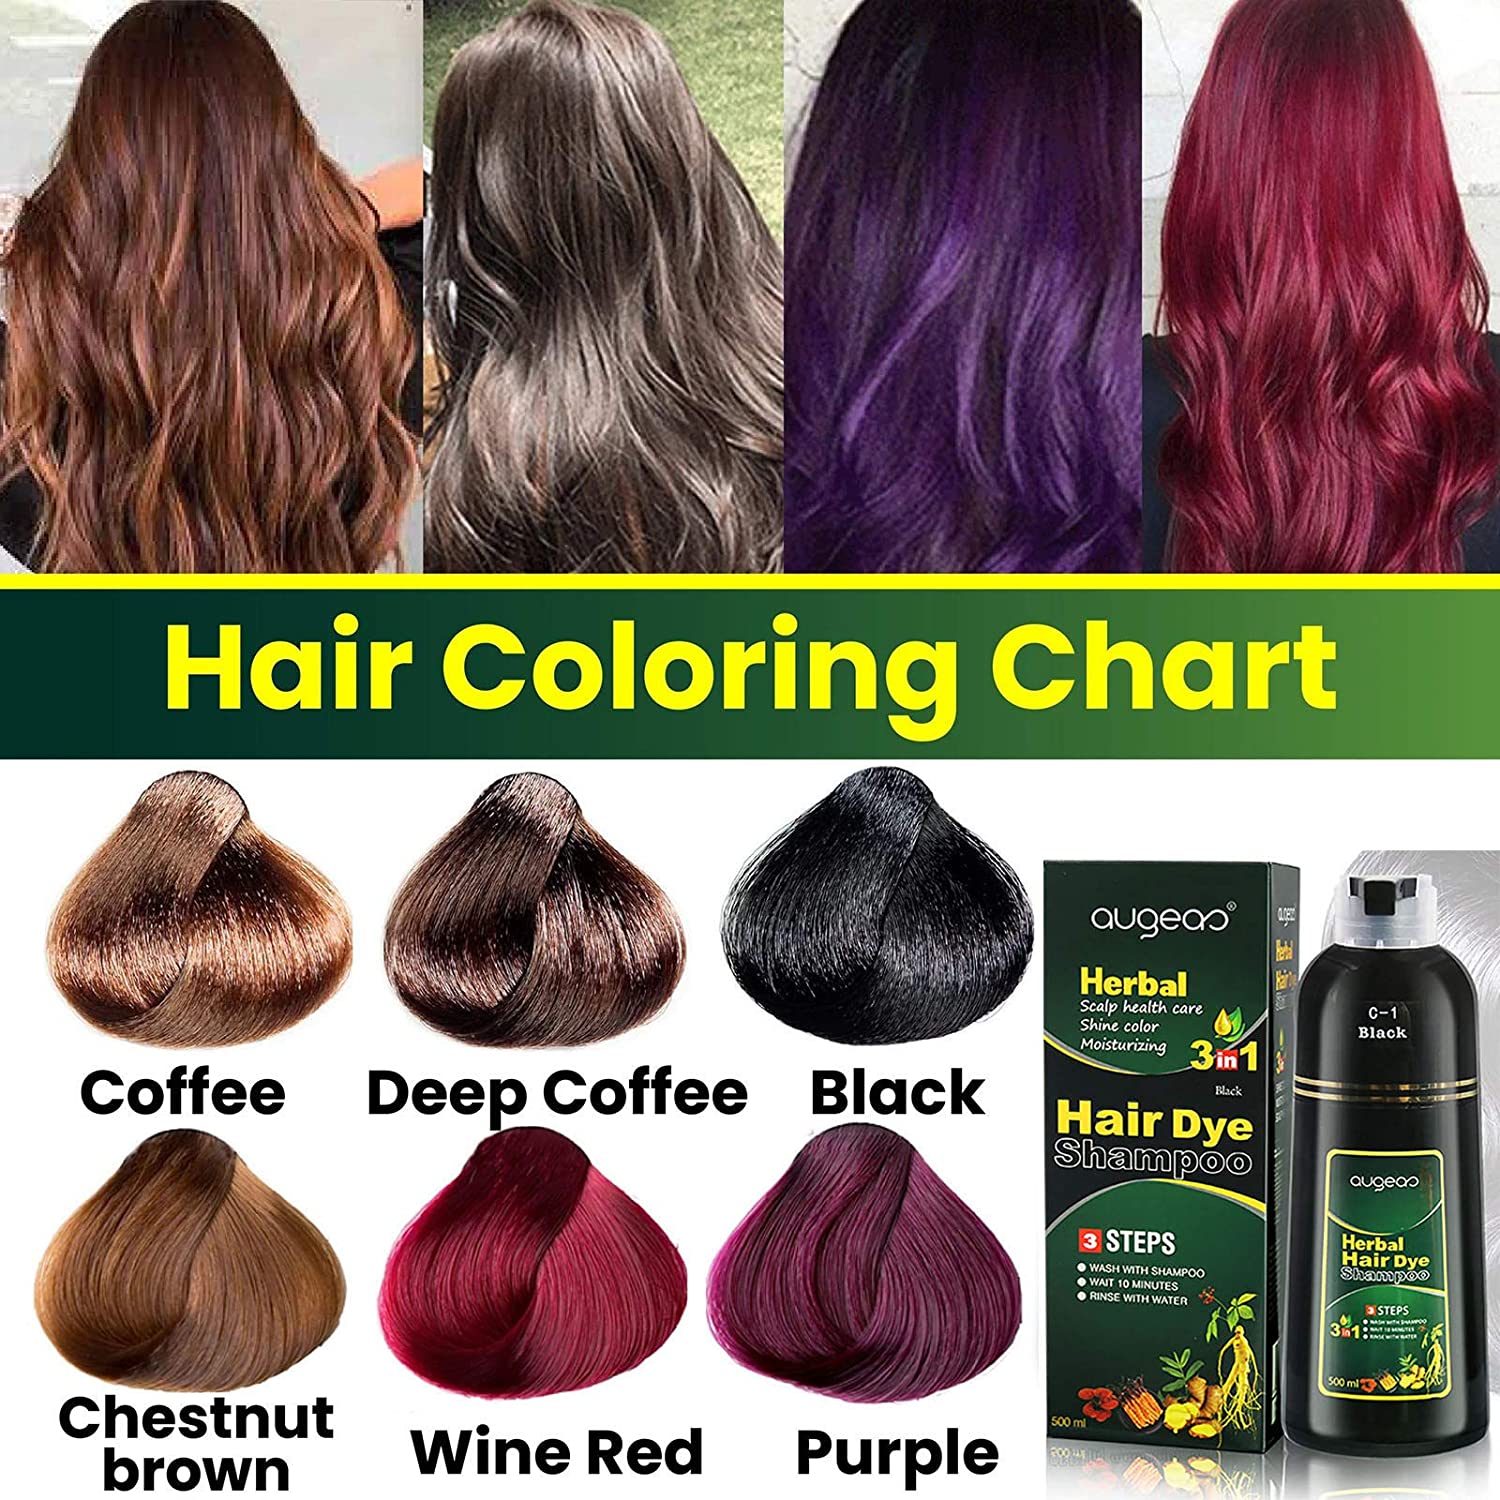 Black Hair Color Shampoo | 3 in 1 with a FREE Pair of Gloves | 500ml / 16.9 Fl Oz | Grey Hair Coverage | AUGEAS - SH Salons